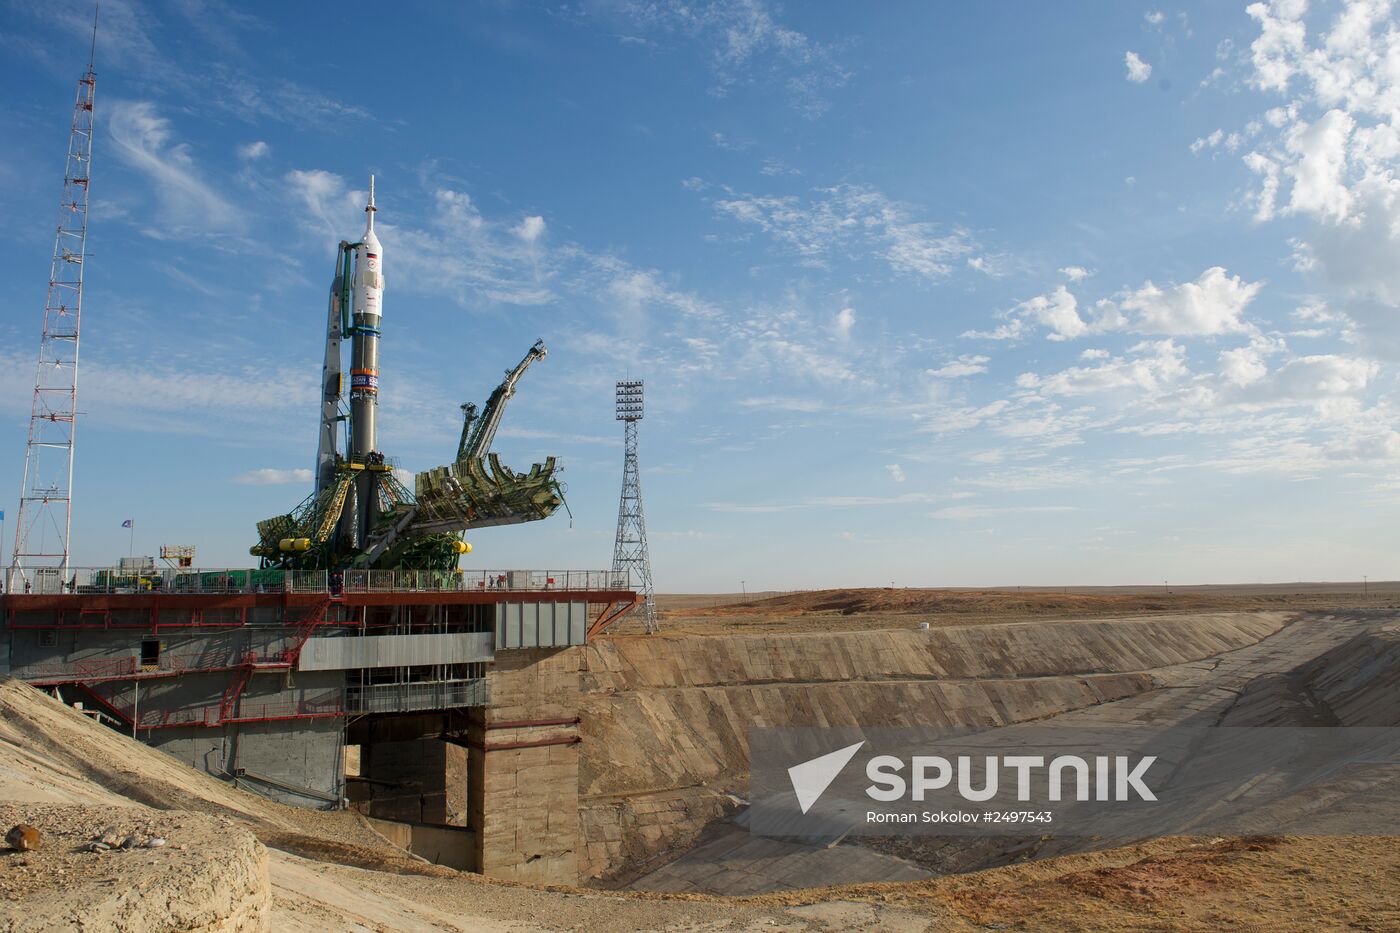 The Soyuz TMA-14M spacecraft approaches the launch pad